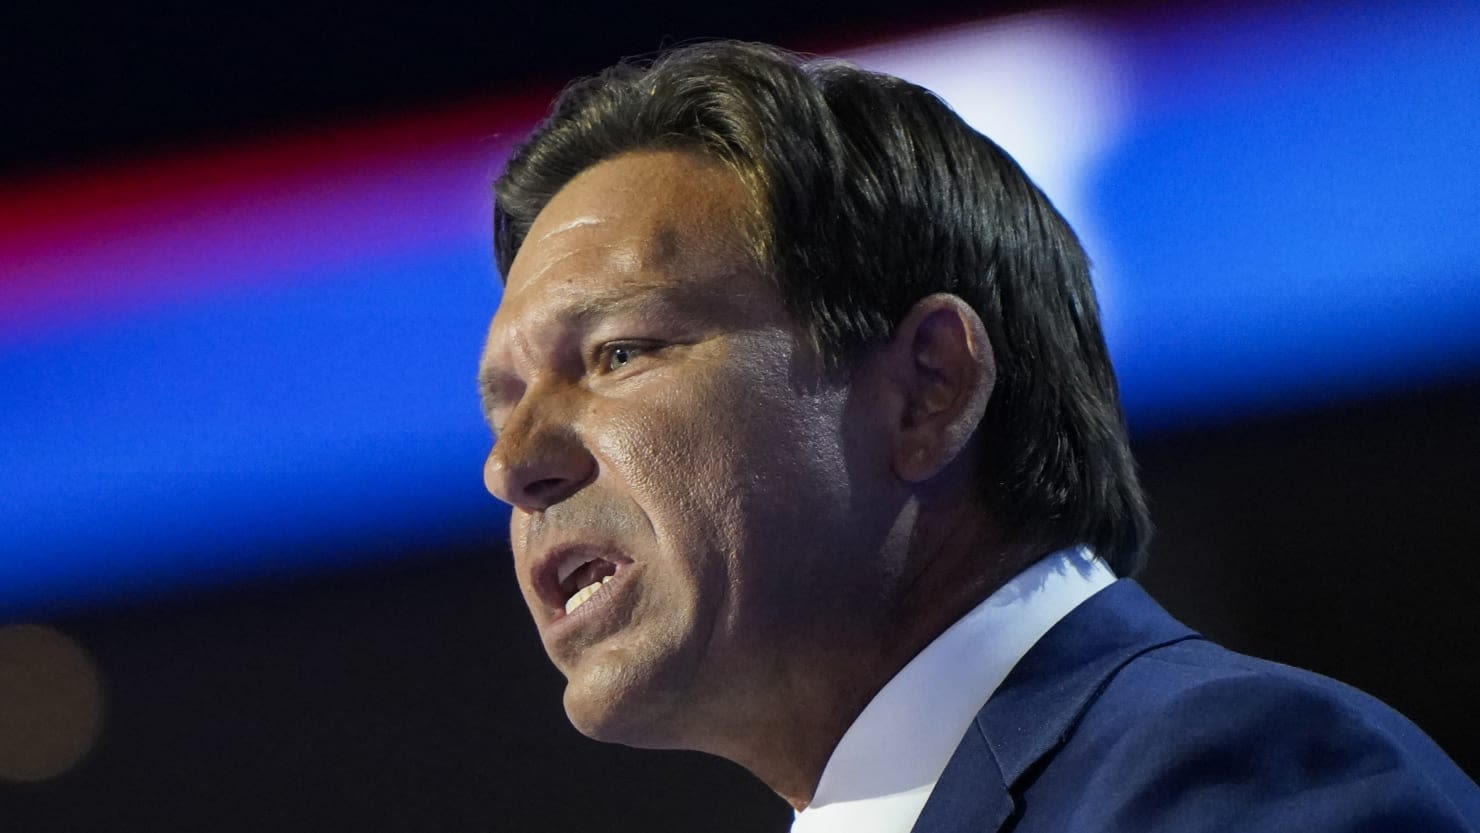 DeSantis in the Clear After Not Disclosing Gifted Golf Simulator